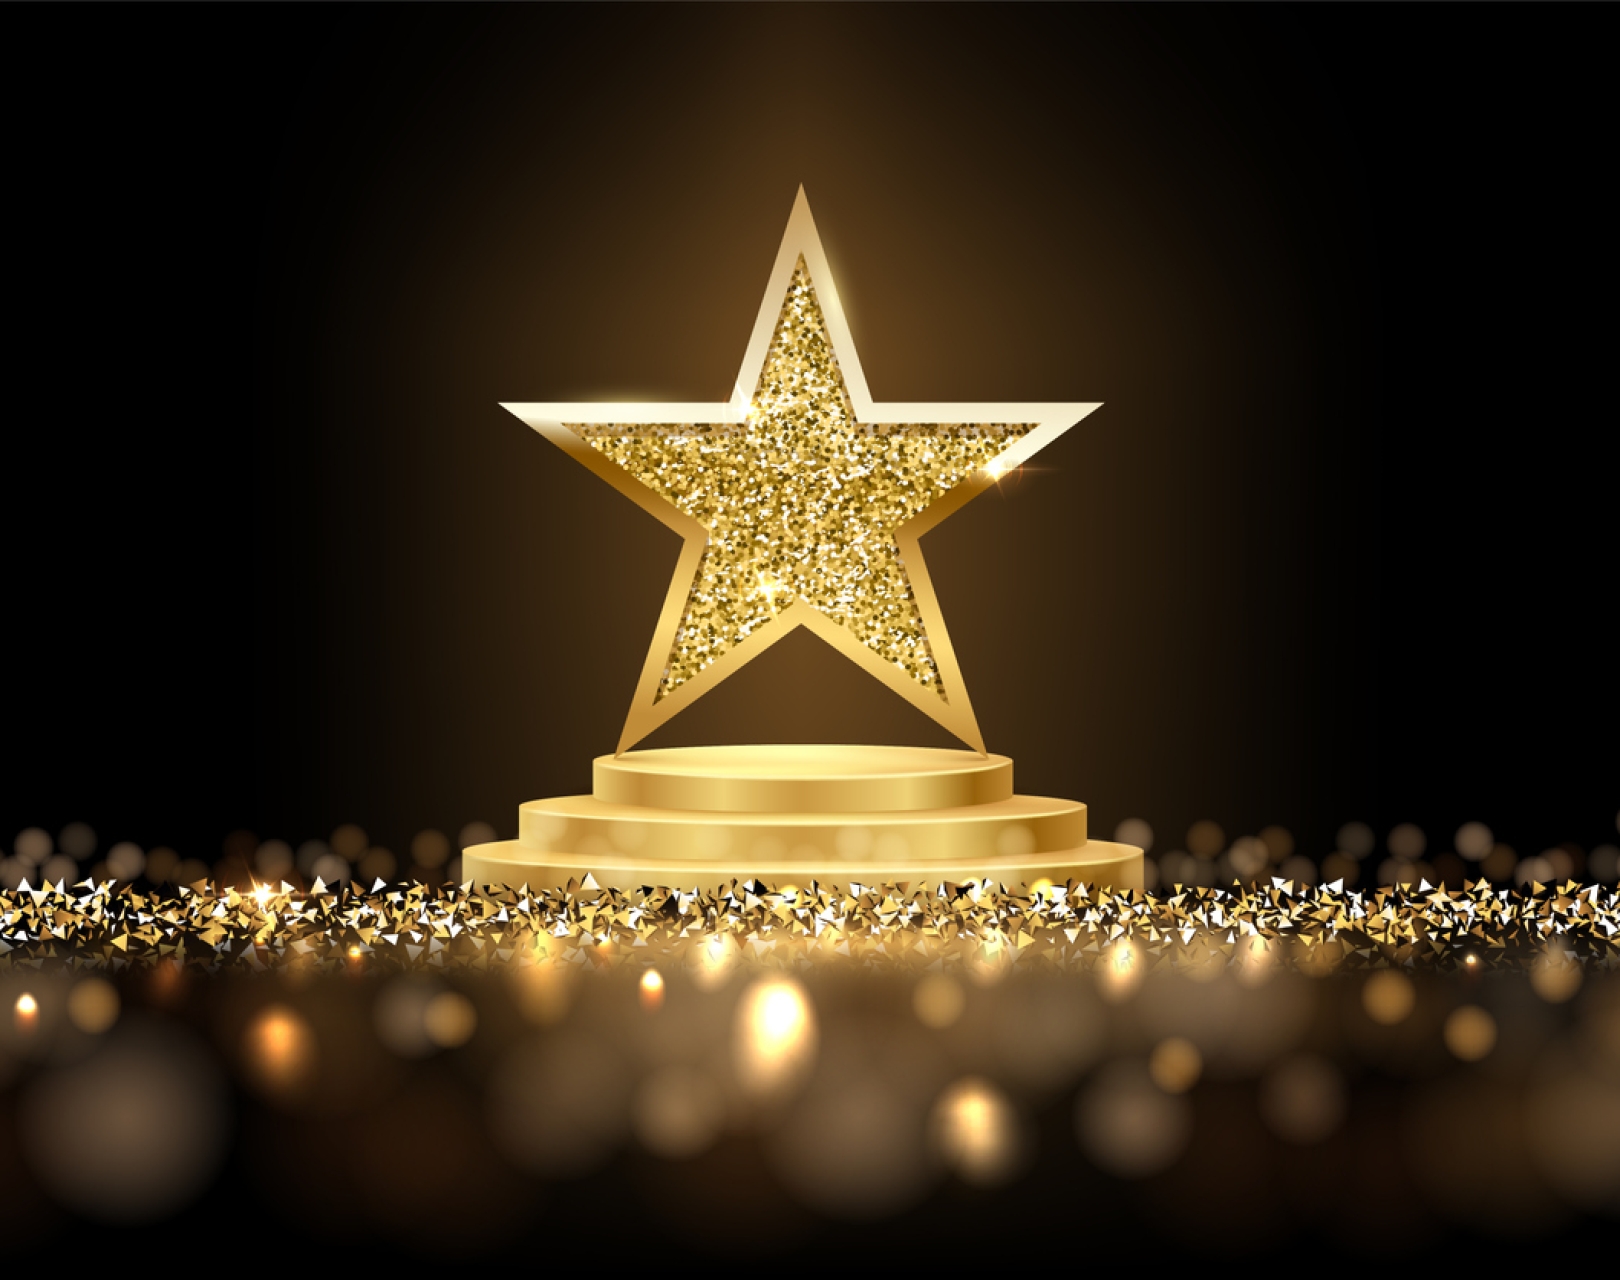 Computer generated image of a three dimensional gold star on a gold circular podium. The centre of the star dazzles. There is a carpet of gold triangle shapes around the podium